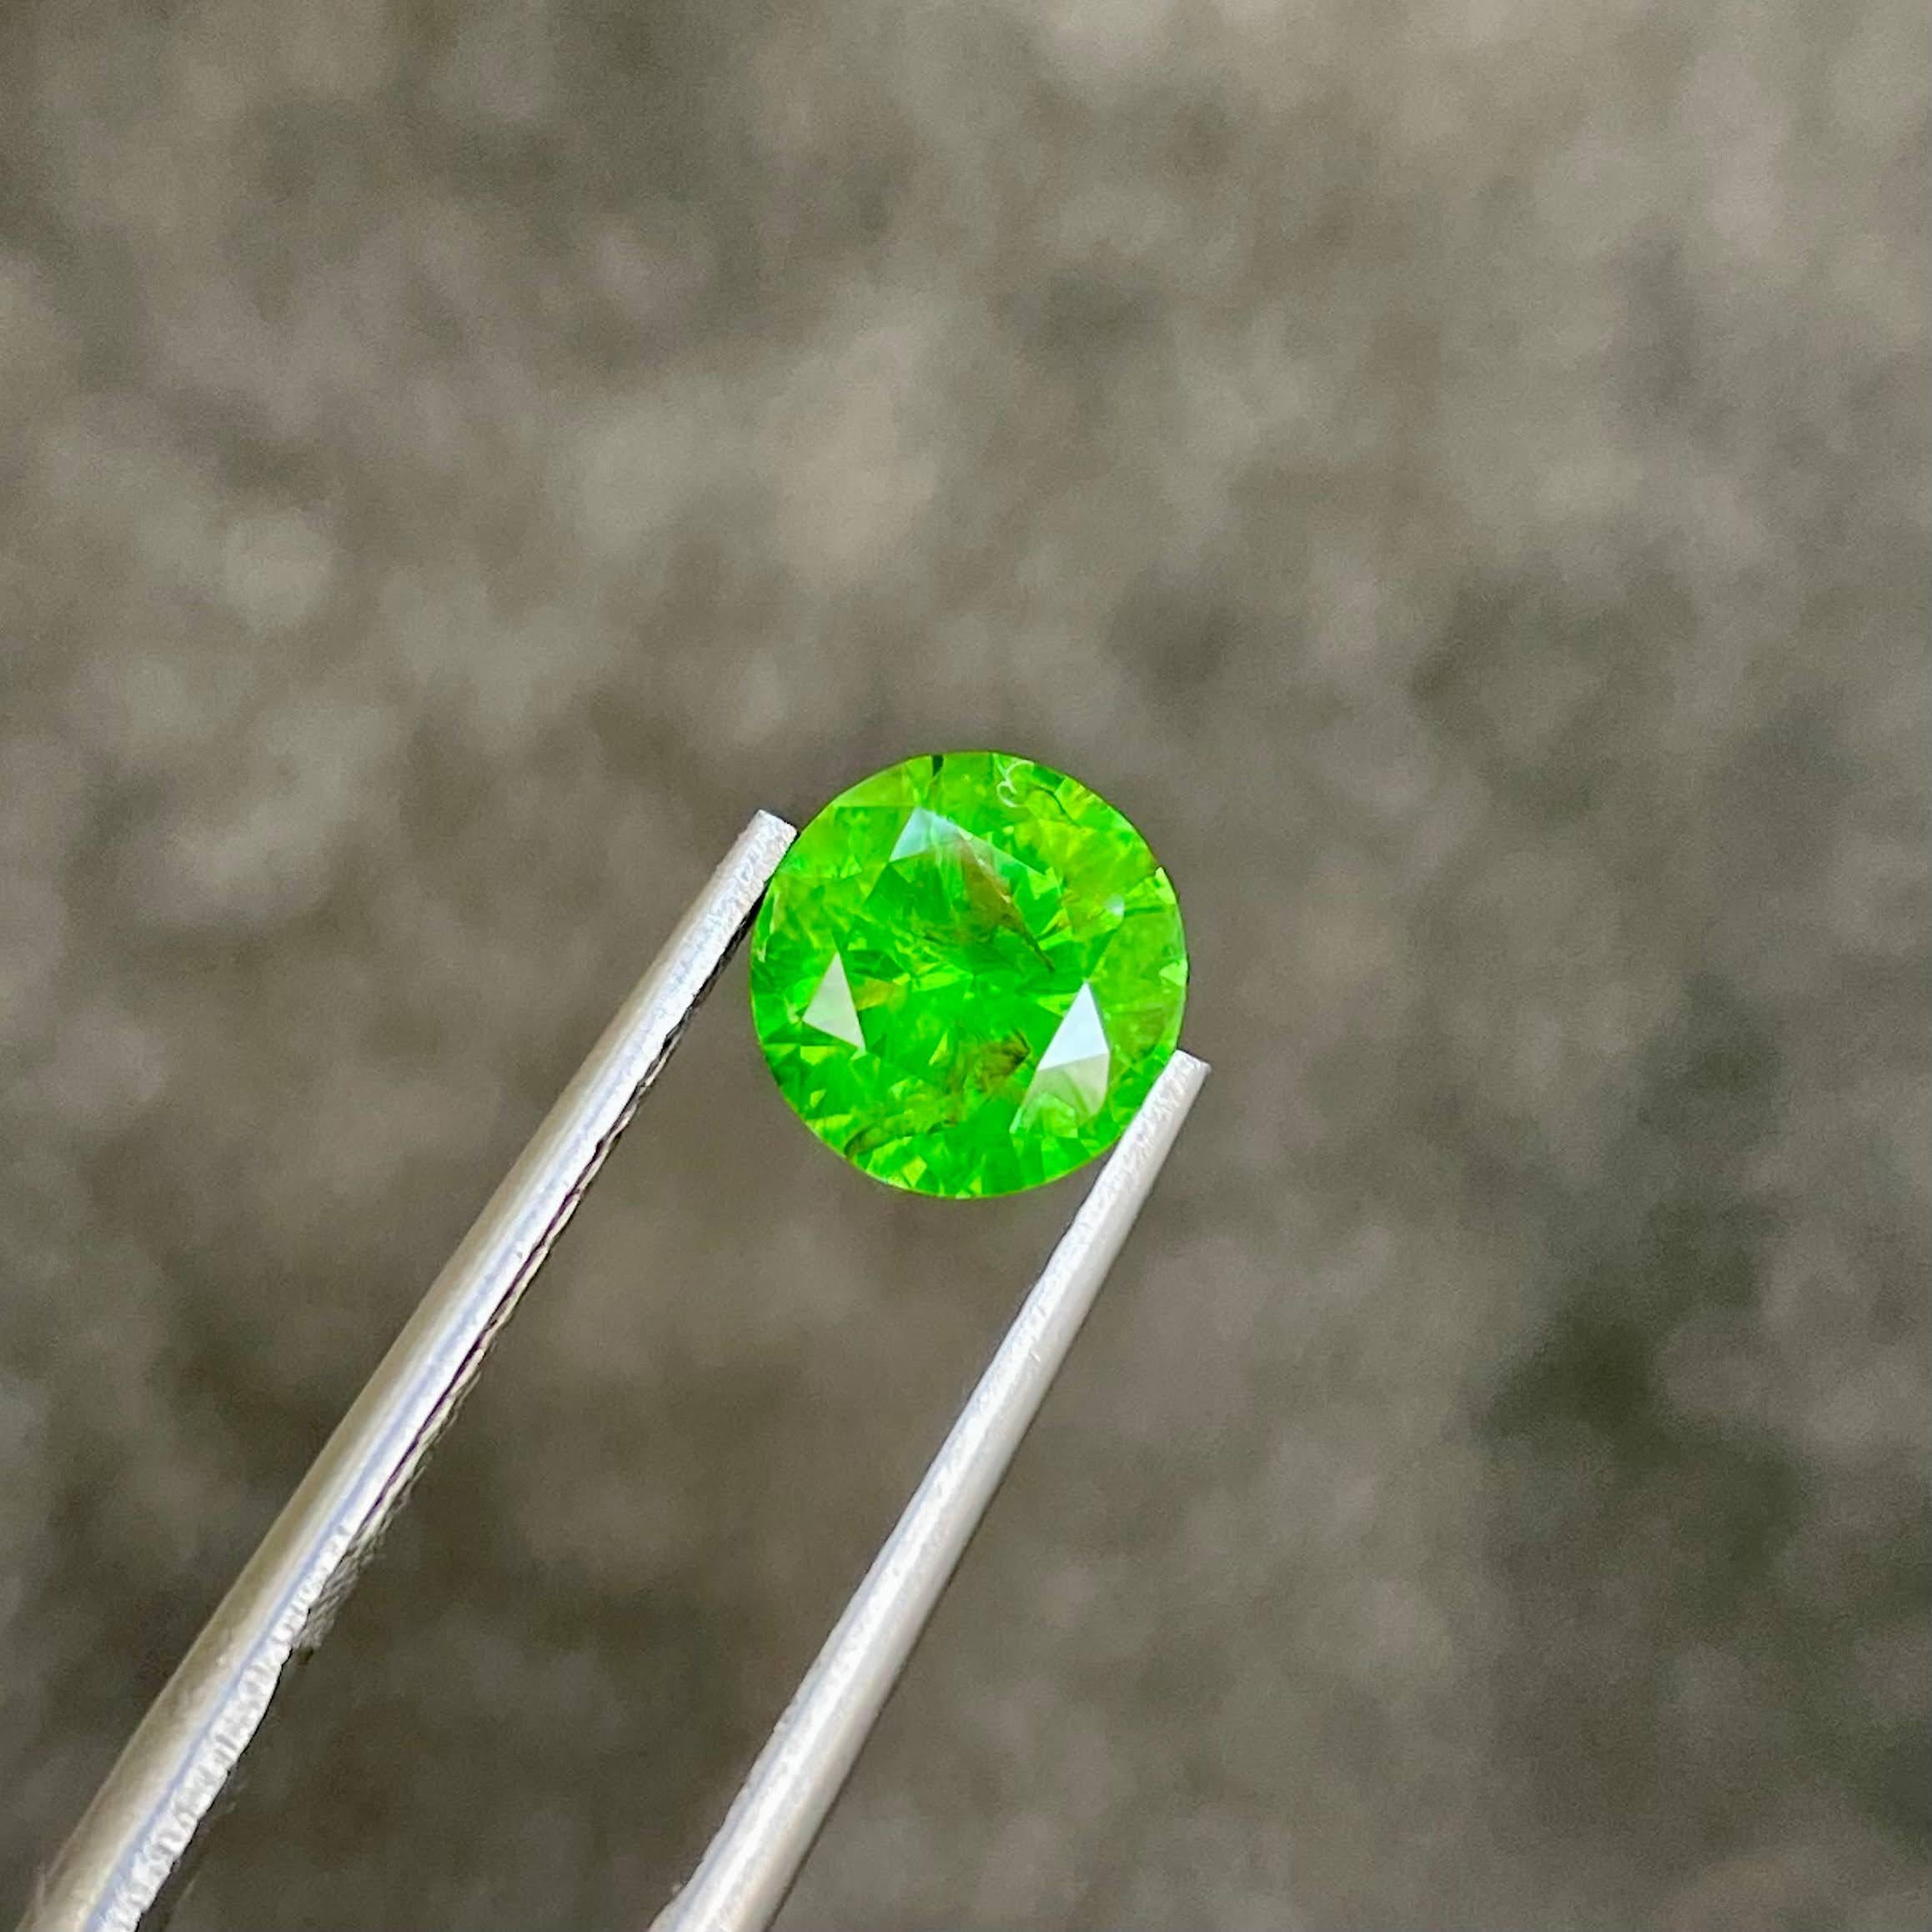 Weight 2.20 carats 
Dimensions 7.95x7.95x5.00 mm
Treatment none 
Origin Russia
Clarity SI
Shape Round 
Cut Round brilliant 




The 2.20-carat Demantoid Garnet stone showcases the exquisite beauty of Russian gemstones with its Round Cut, revealing a